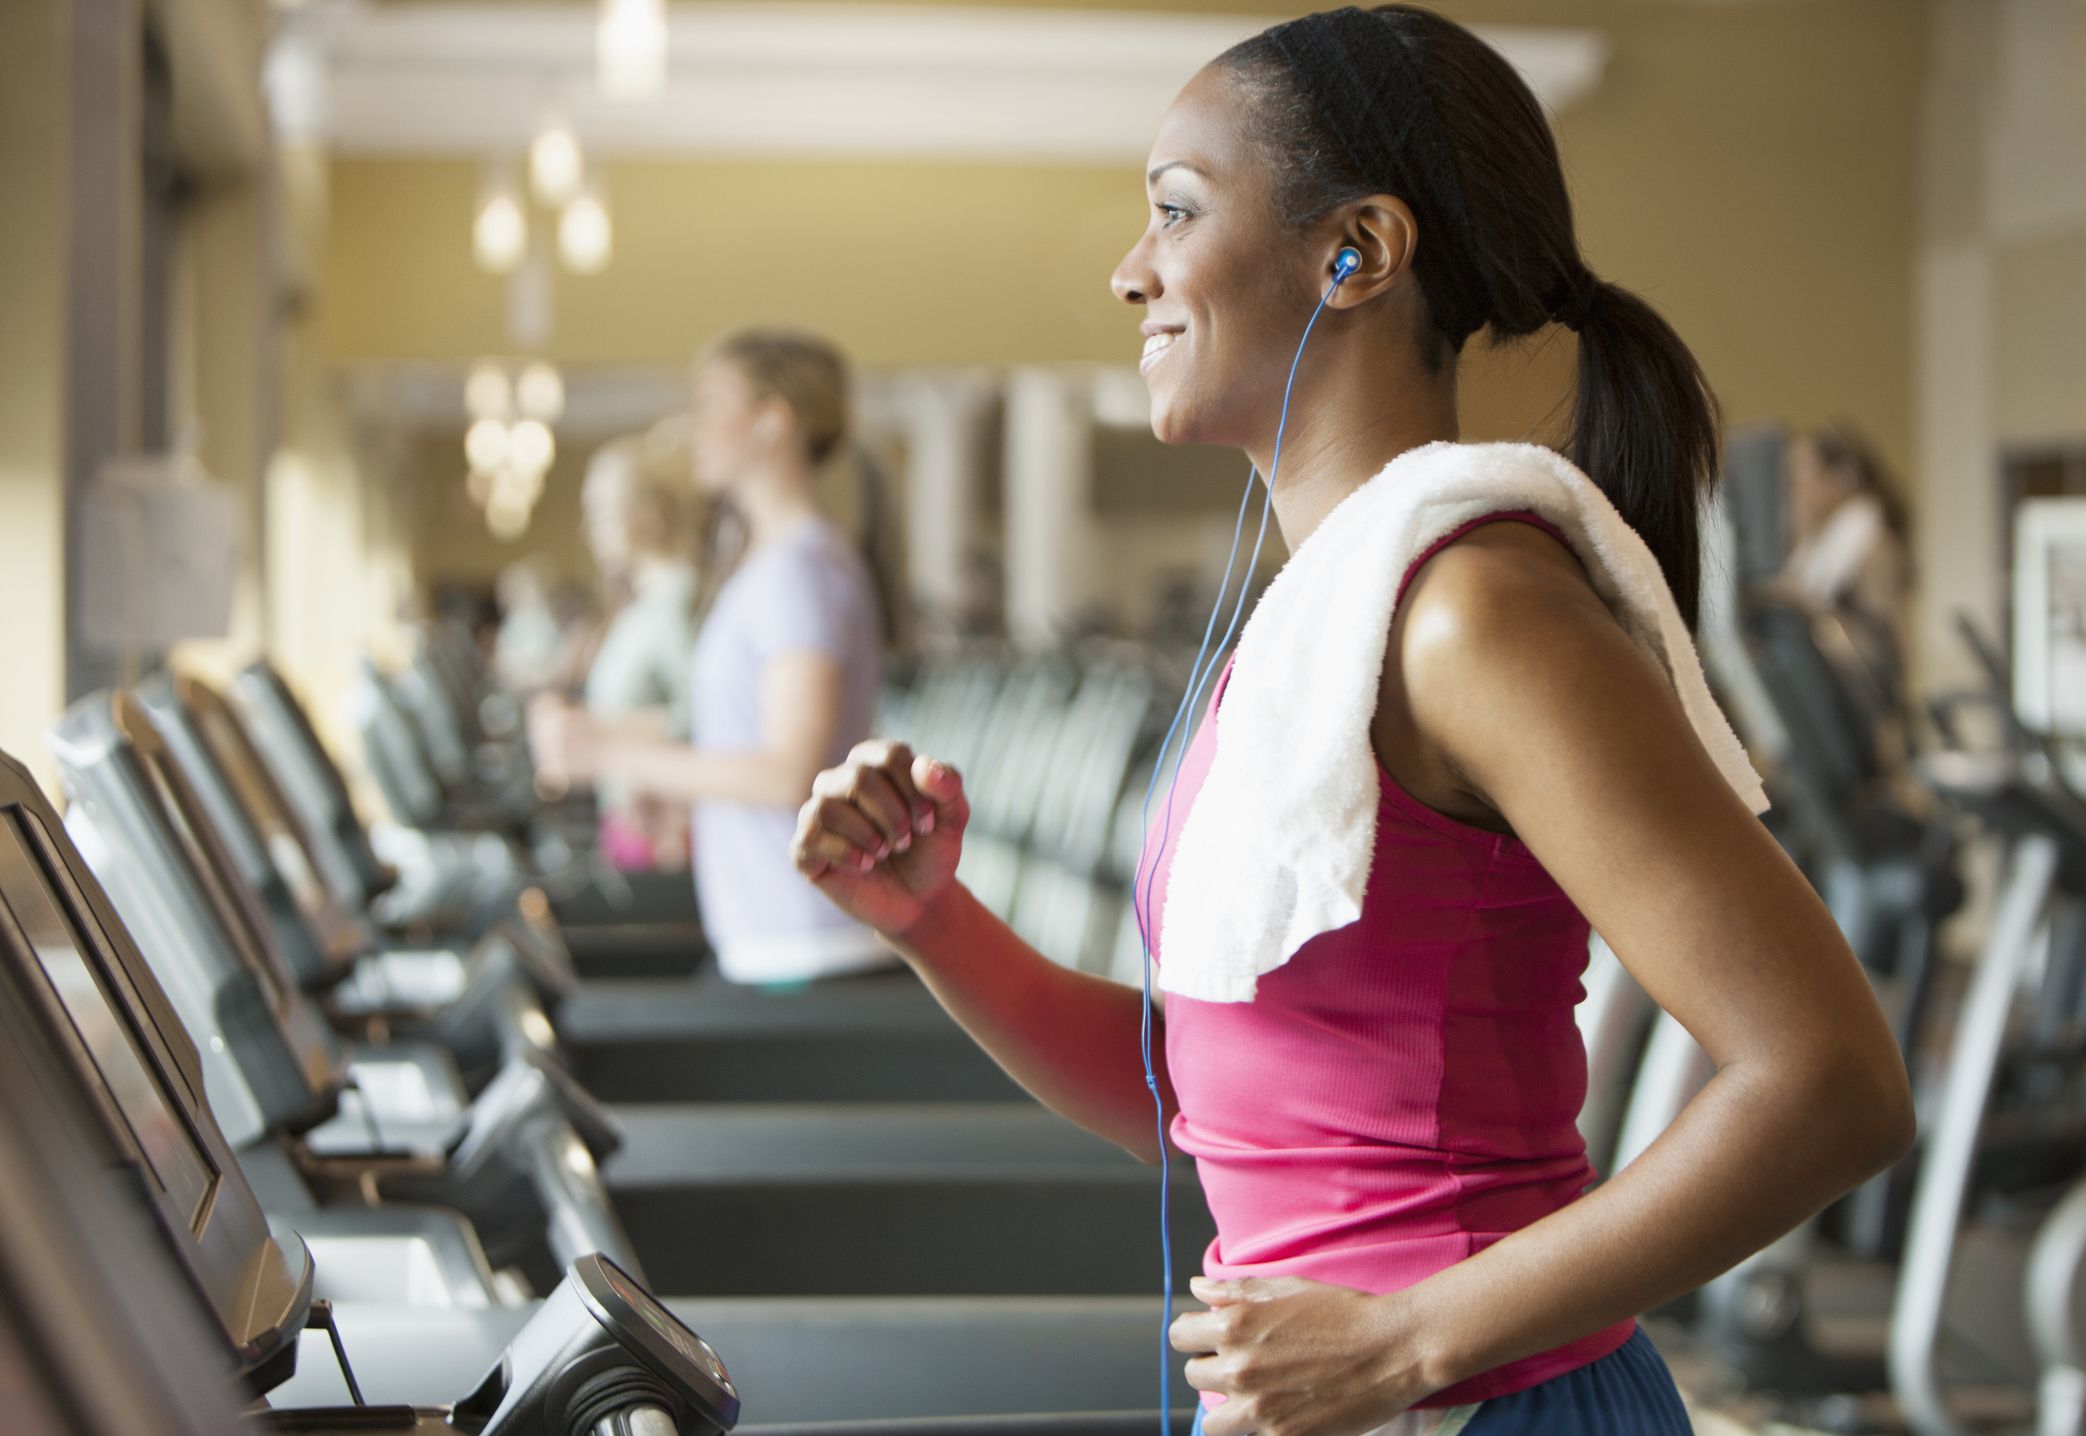 Is A Month-to-Month Gym Membership Right for You? - Crunch